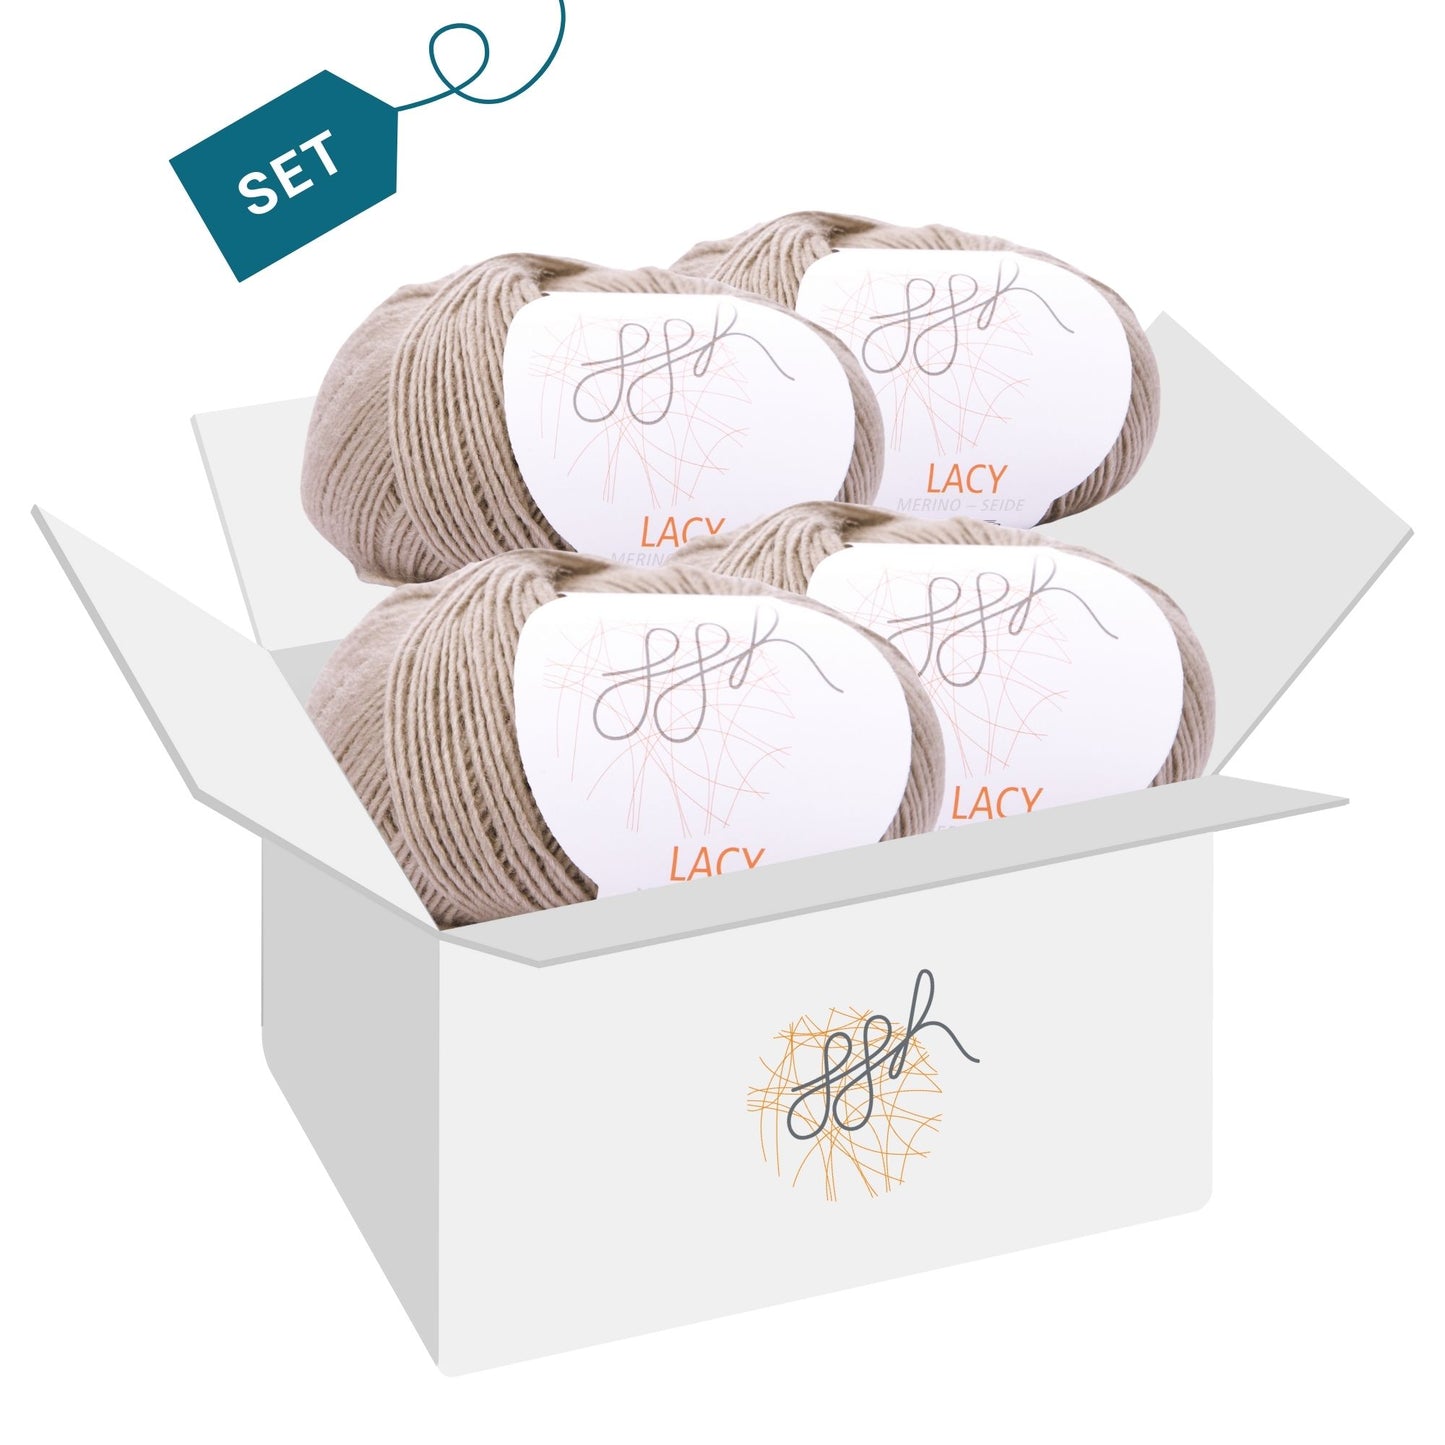 ggh Lacy | Set of 4 x 25g (total 100g) - 019 - Beige